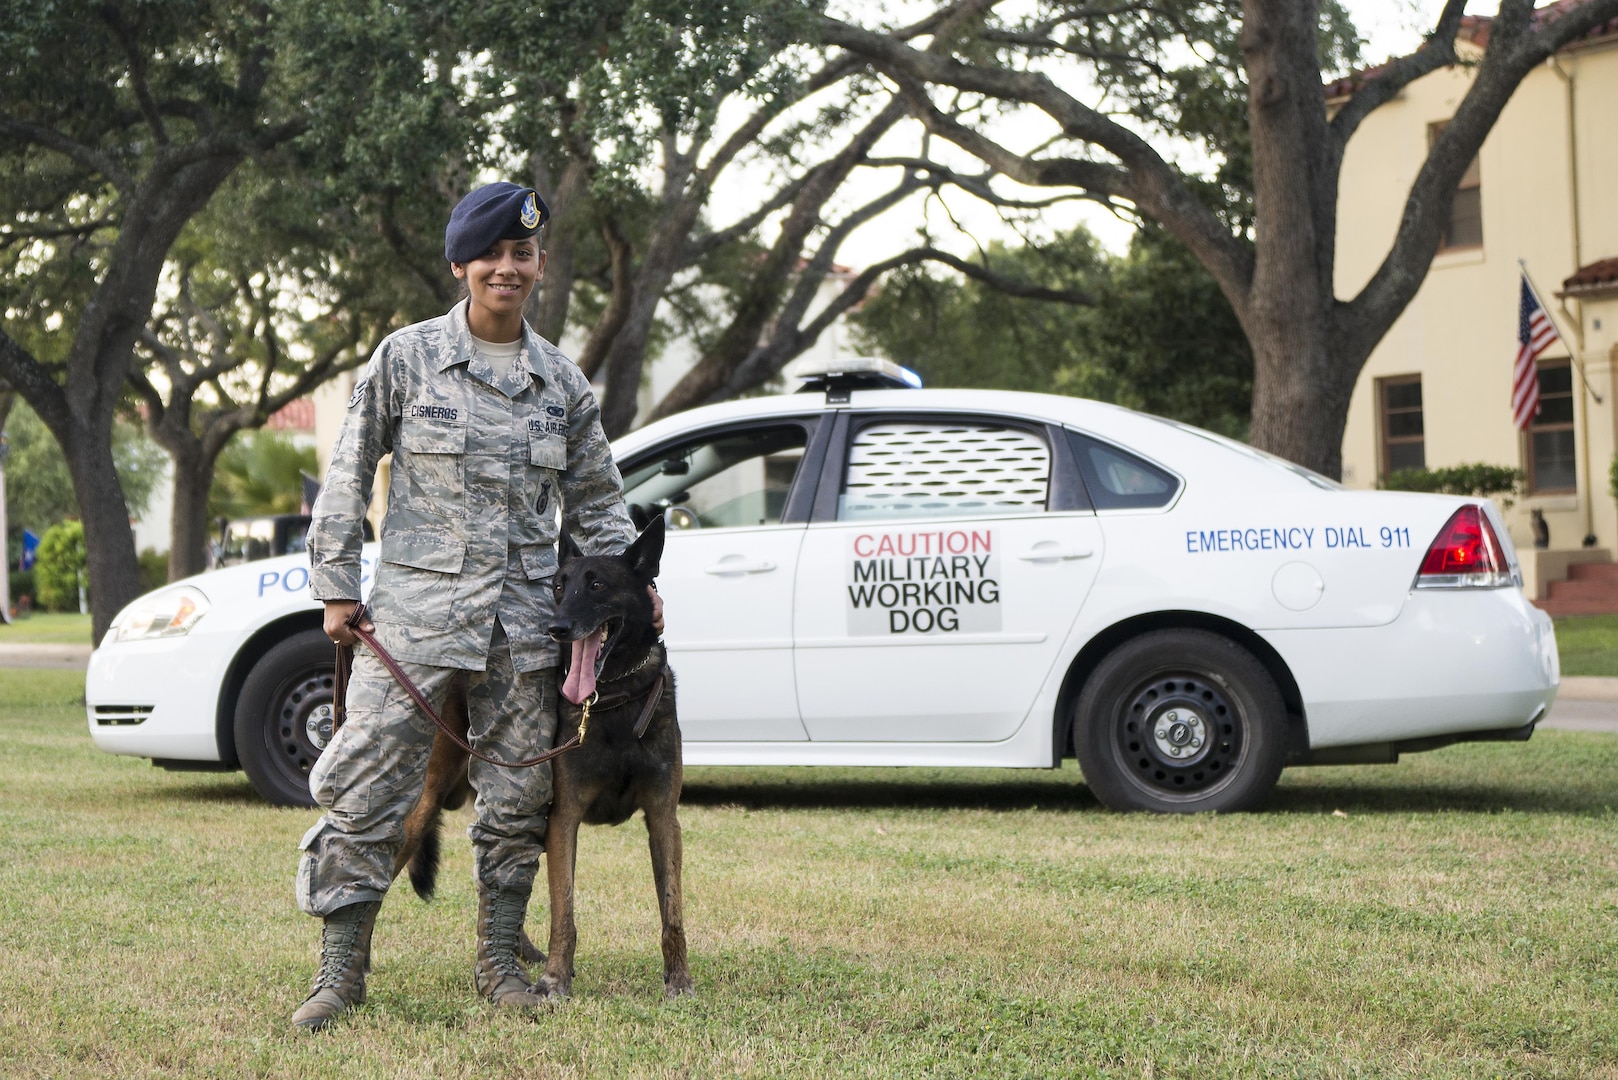 Senior Airman Ivette Cisneros, 902nd Security Forces Squadron military working dog handler, prepares to participate in a MWD demonstration with her dog, Vudu, at National Night Out at Joint Base San Antonio-Randolph Oct. 4, 2016. The 902nd SFS is home to six MWDs; each dog has explosives and narcotics training as part of their weekly duties.